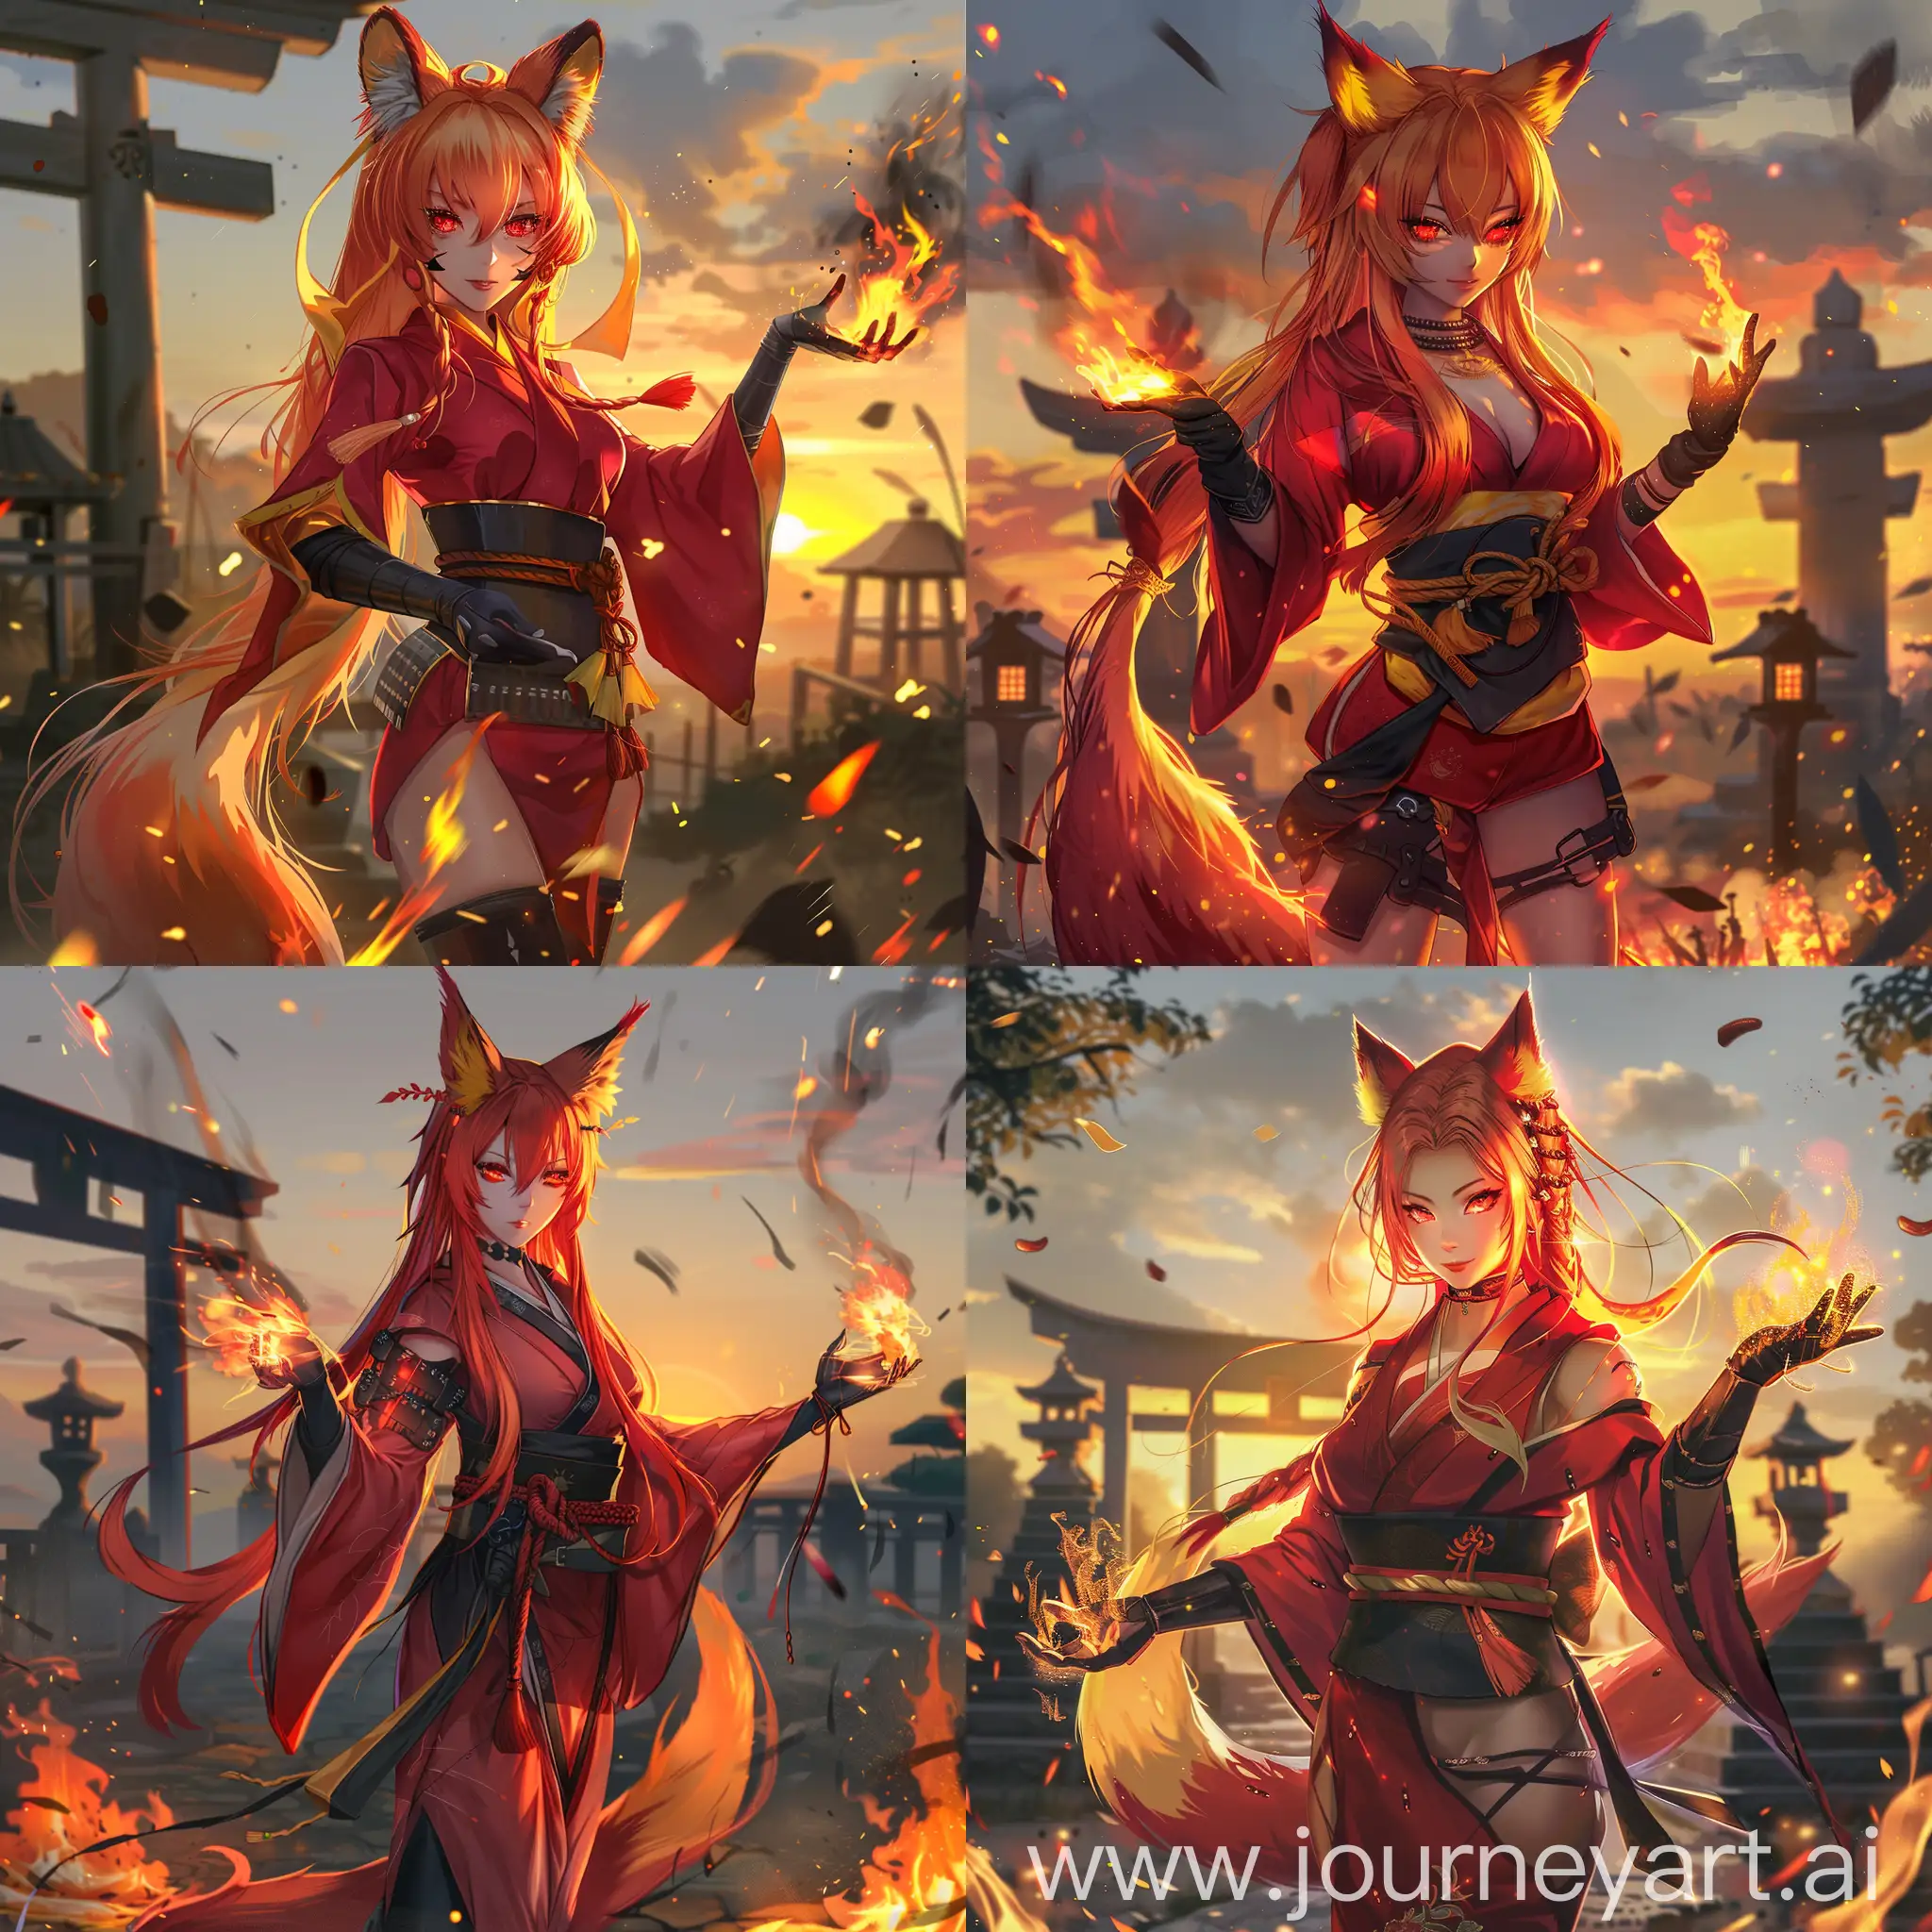 anime-style, full body, athletic, beautiful, tan skin, asian woman, long red hair with yellow highlights, red fox ears with yellow tips, red fox tail with yellow tip attached to her waist, fiery red eyes, wearing a red kimono, black hakama, black sash, long black gloves, black leather boots, casting fire magic, hands wrapped in fire,  good anatomy, dynamic, embers falling in foreground, shinto shrine, sunset